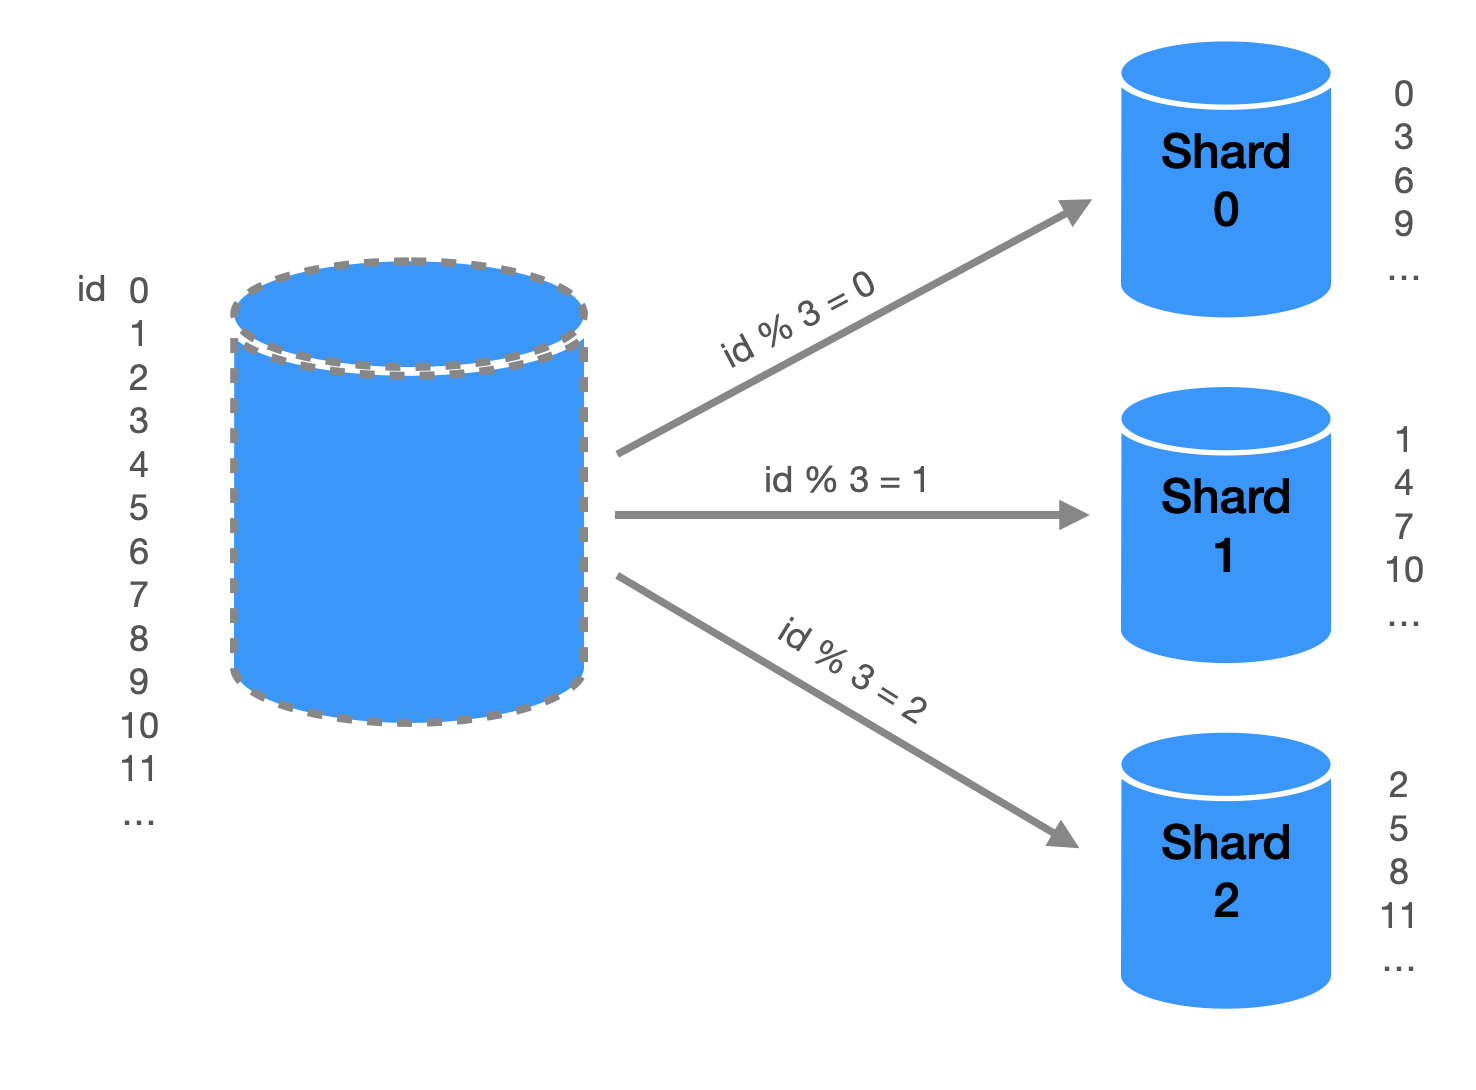 data-is-divided-into-multiple-subsets-stored-on-different-shards